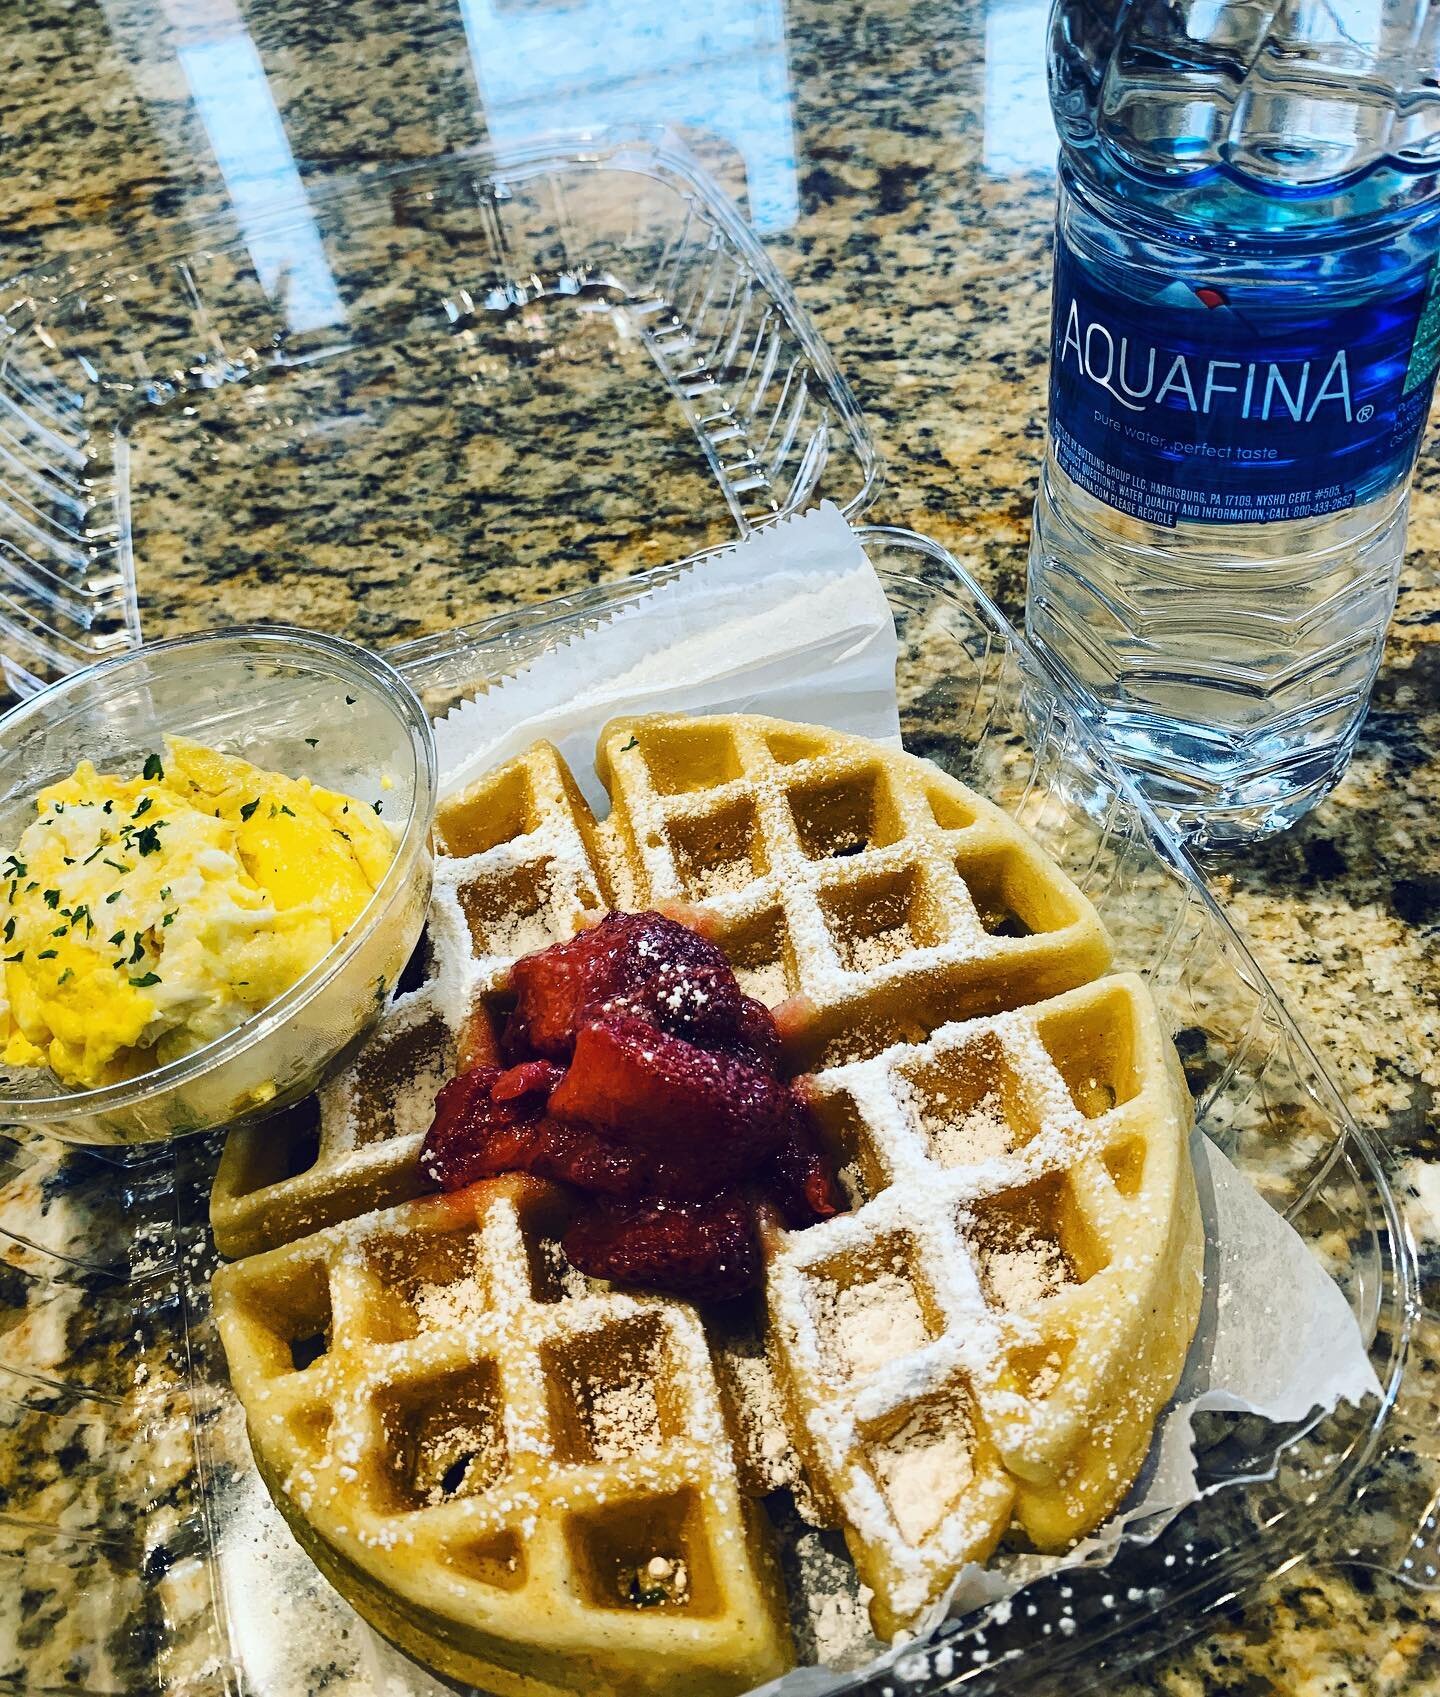 Don&rsquo;t miss out on breakfast or brunch. - Large Belgian waffle, 2 egg saufle, and a drink. Yes you can substitute. Call us. We&rsquo;ll have it bagged ready for curbside pickup. #RochesterCafe #1872Cafe